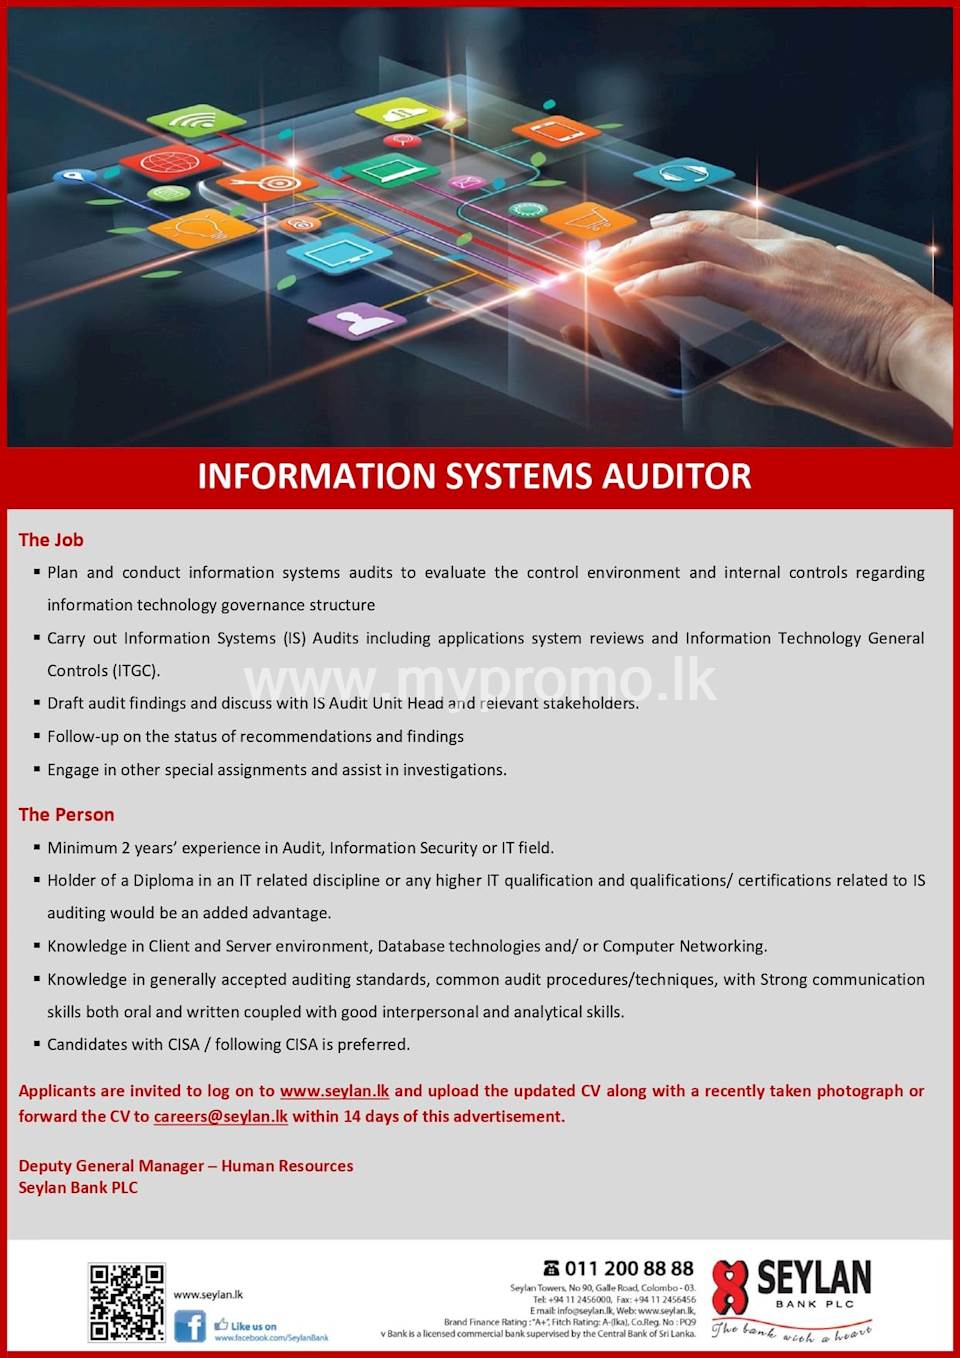 Information Systems Auditor